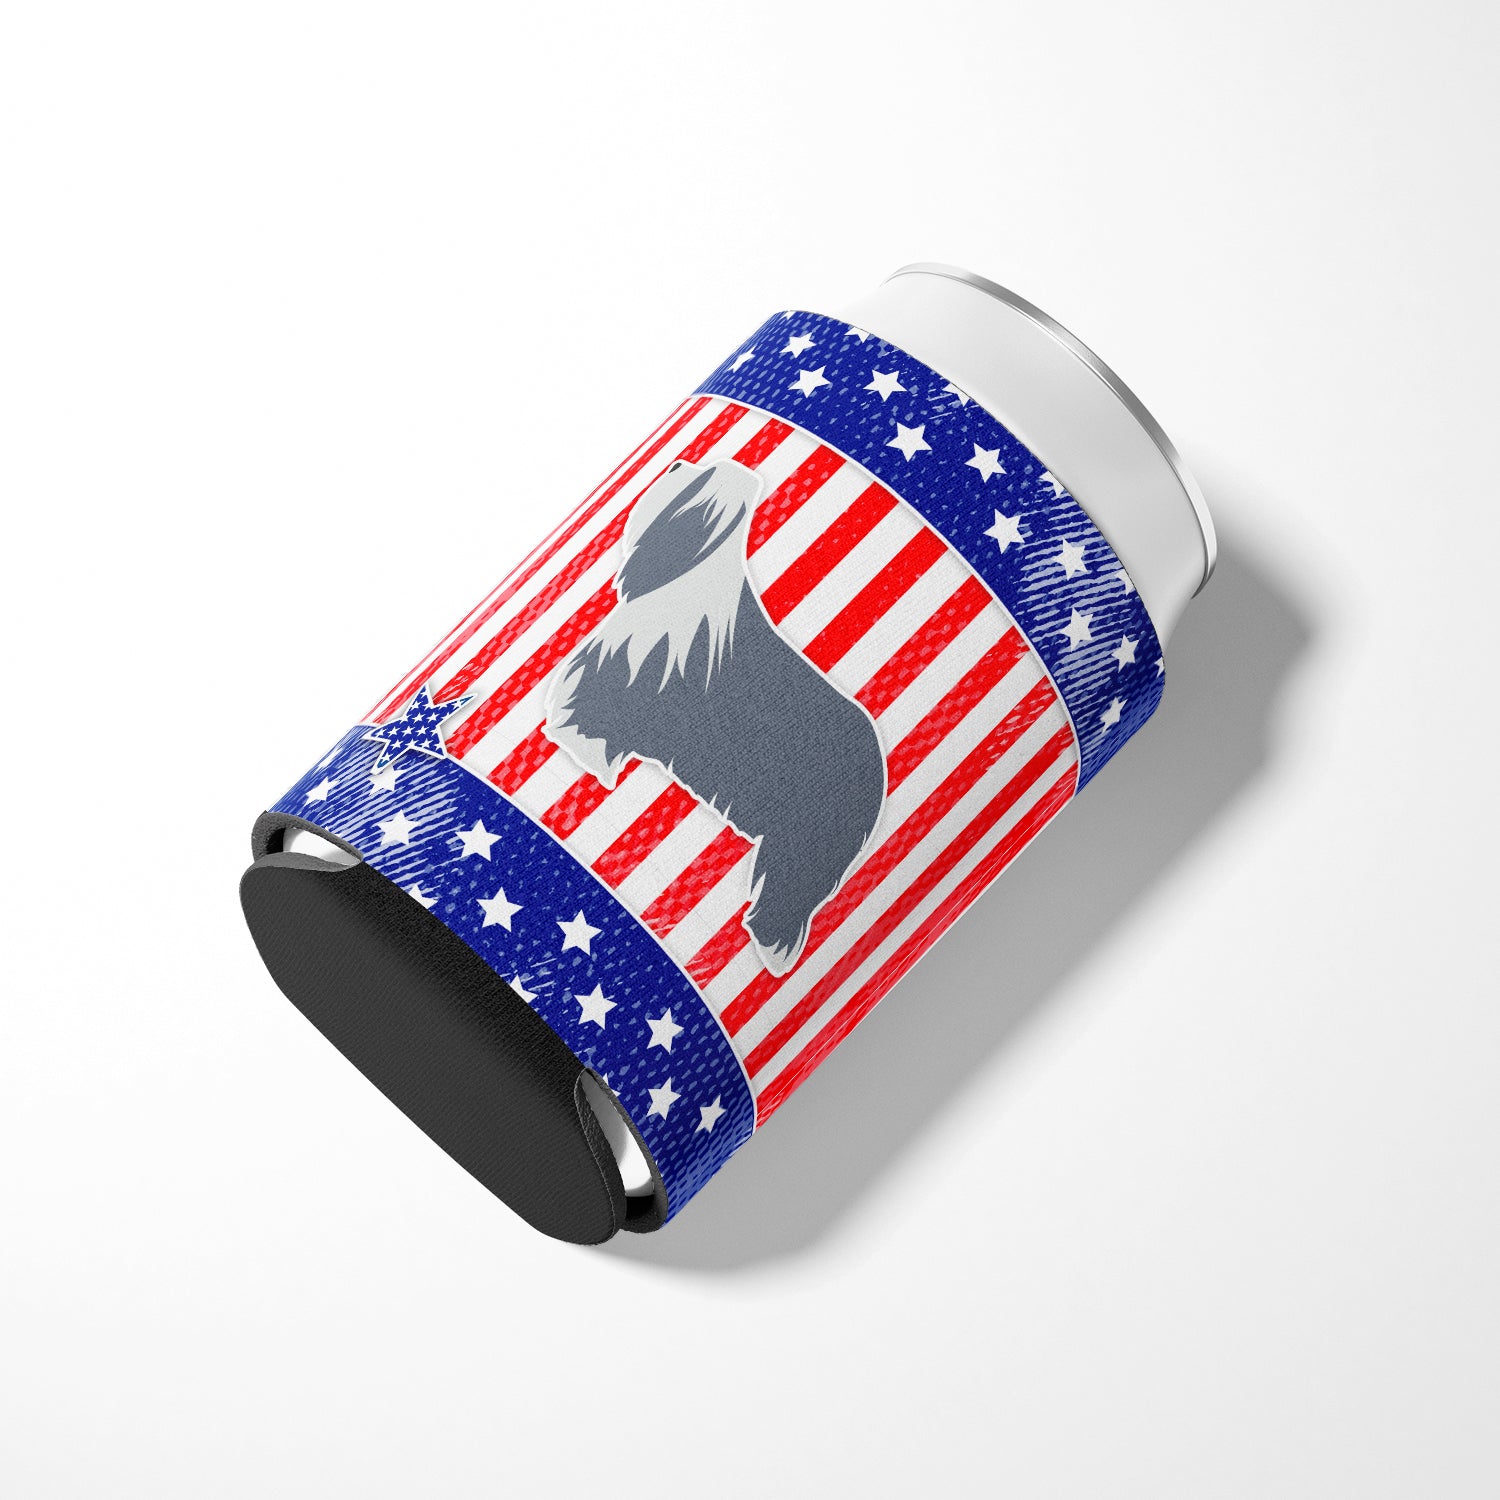 USA Patriotic Bearded Collie Can or Bottle Hugger BB3317CC  the-store.com.